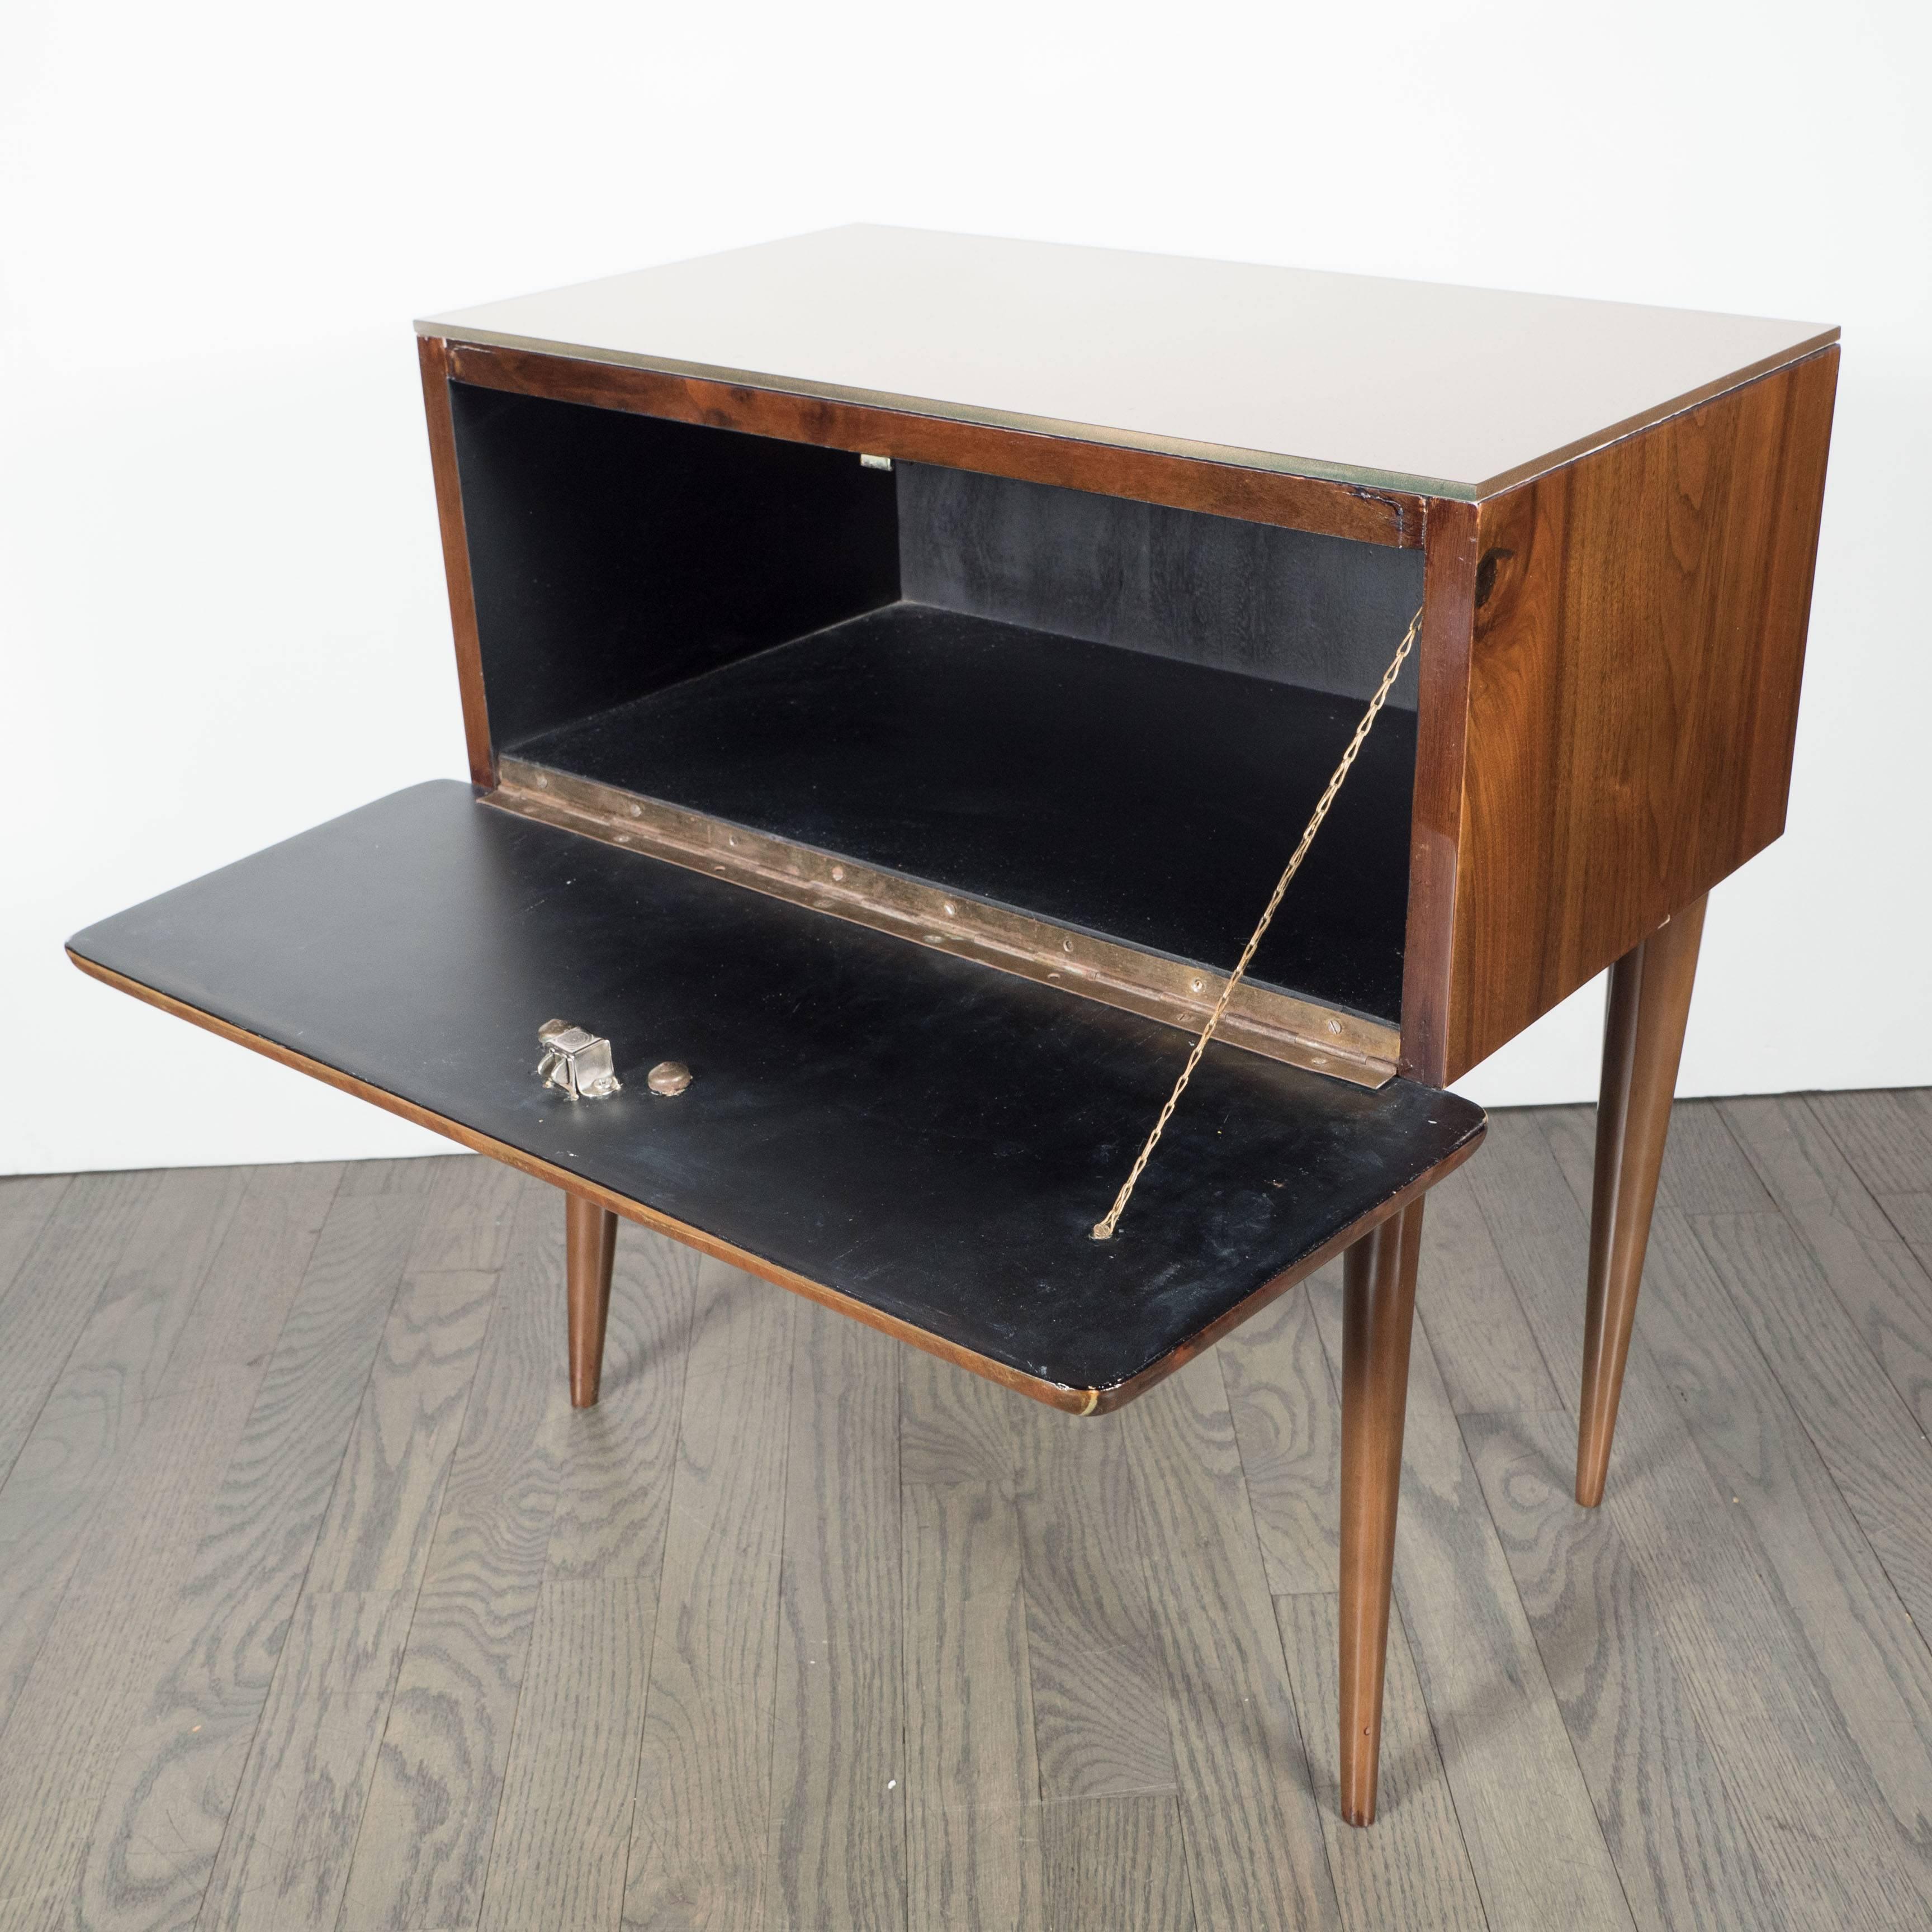 Sophisticated nightstand or end table features a drop front drawer with bookmatched inlays of burled walnut and zebra wood with a holly inlay and a clean modernist handle in the center. The top features a reverse églomisé gold painted glass top. The